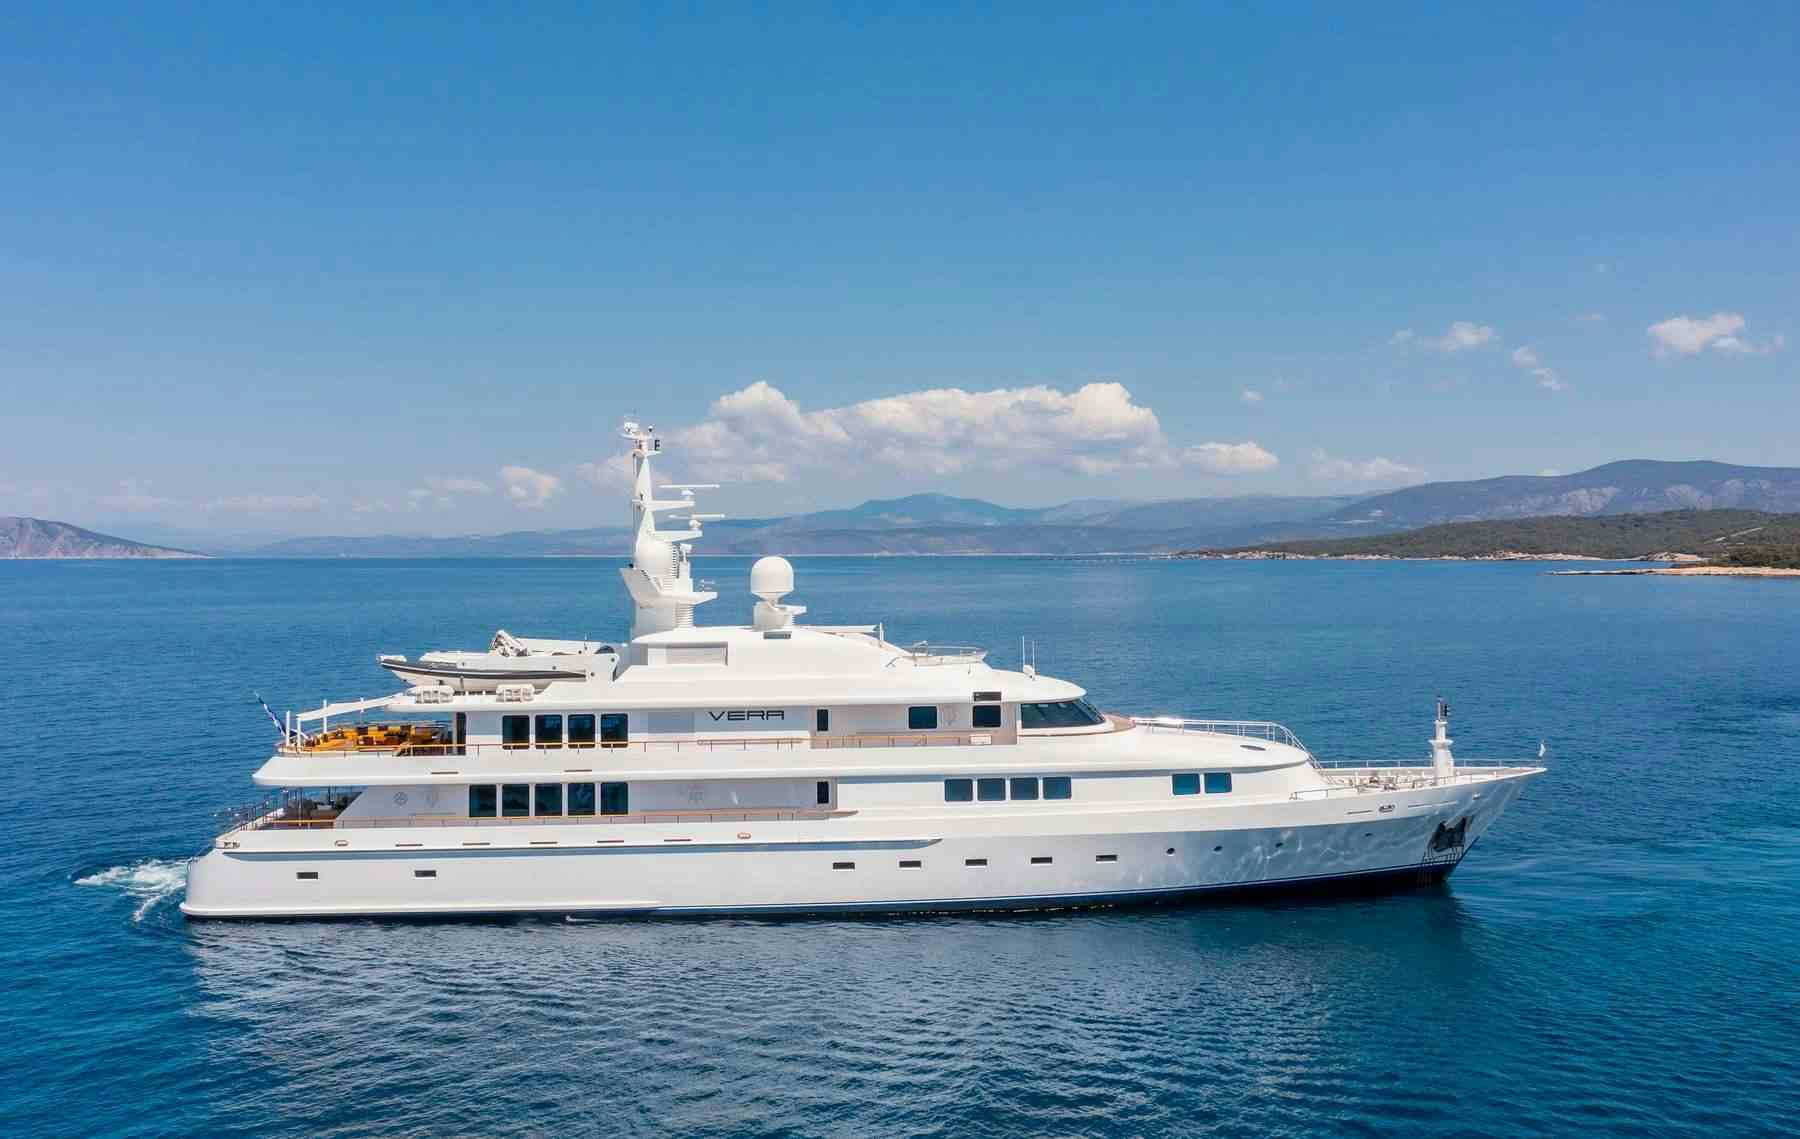 vera - Yacht Charter Italy & Boat hire in East Mediterranean 1